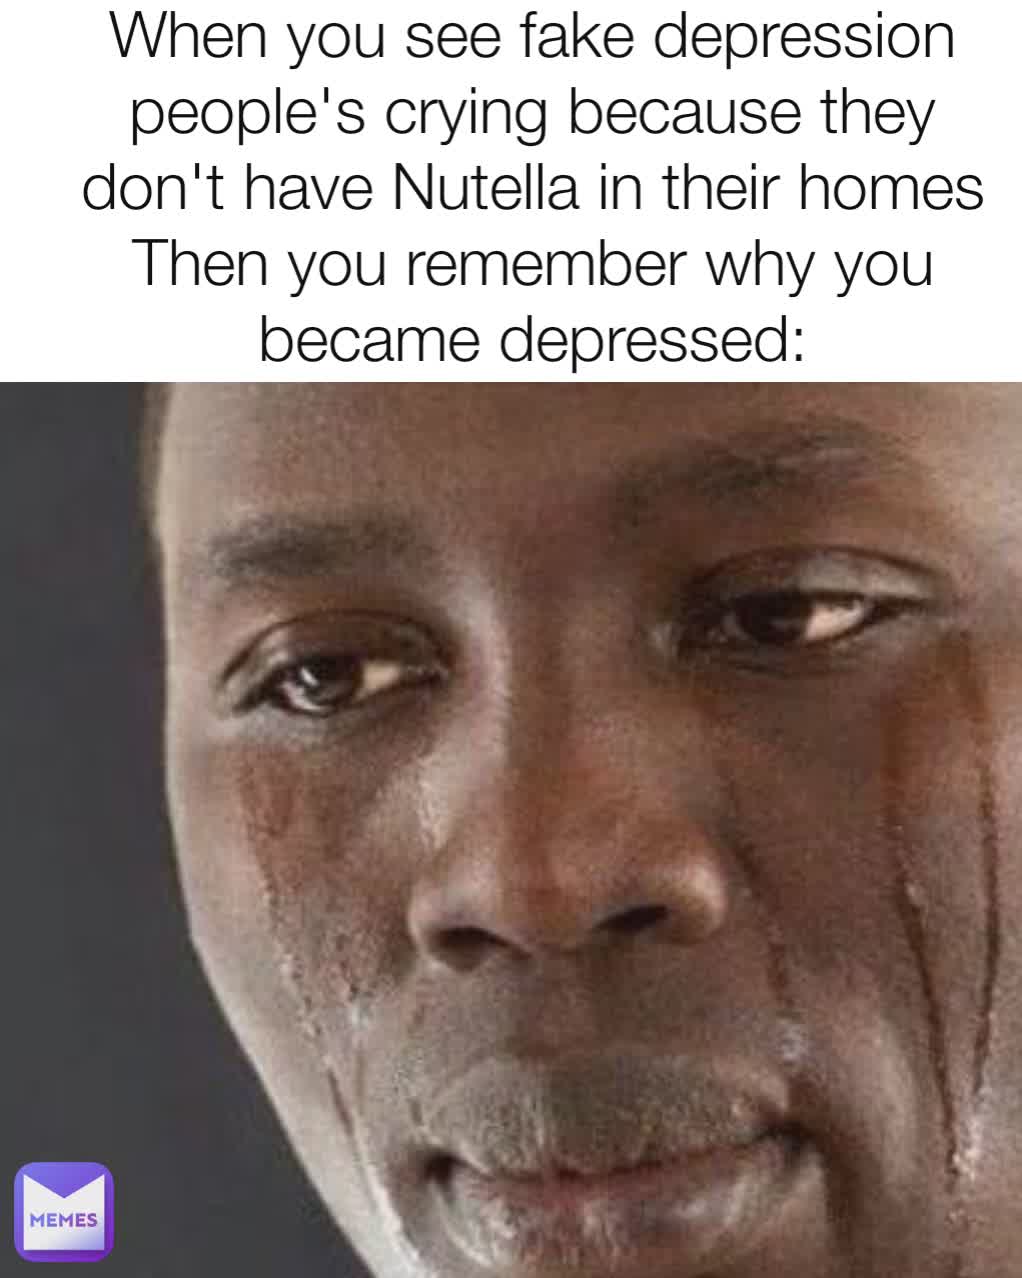 When you see fake depression  people's crying because they don't have Nutella in their homes
Then you remember why you became depressed: